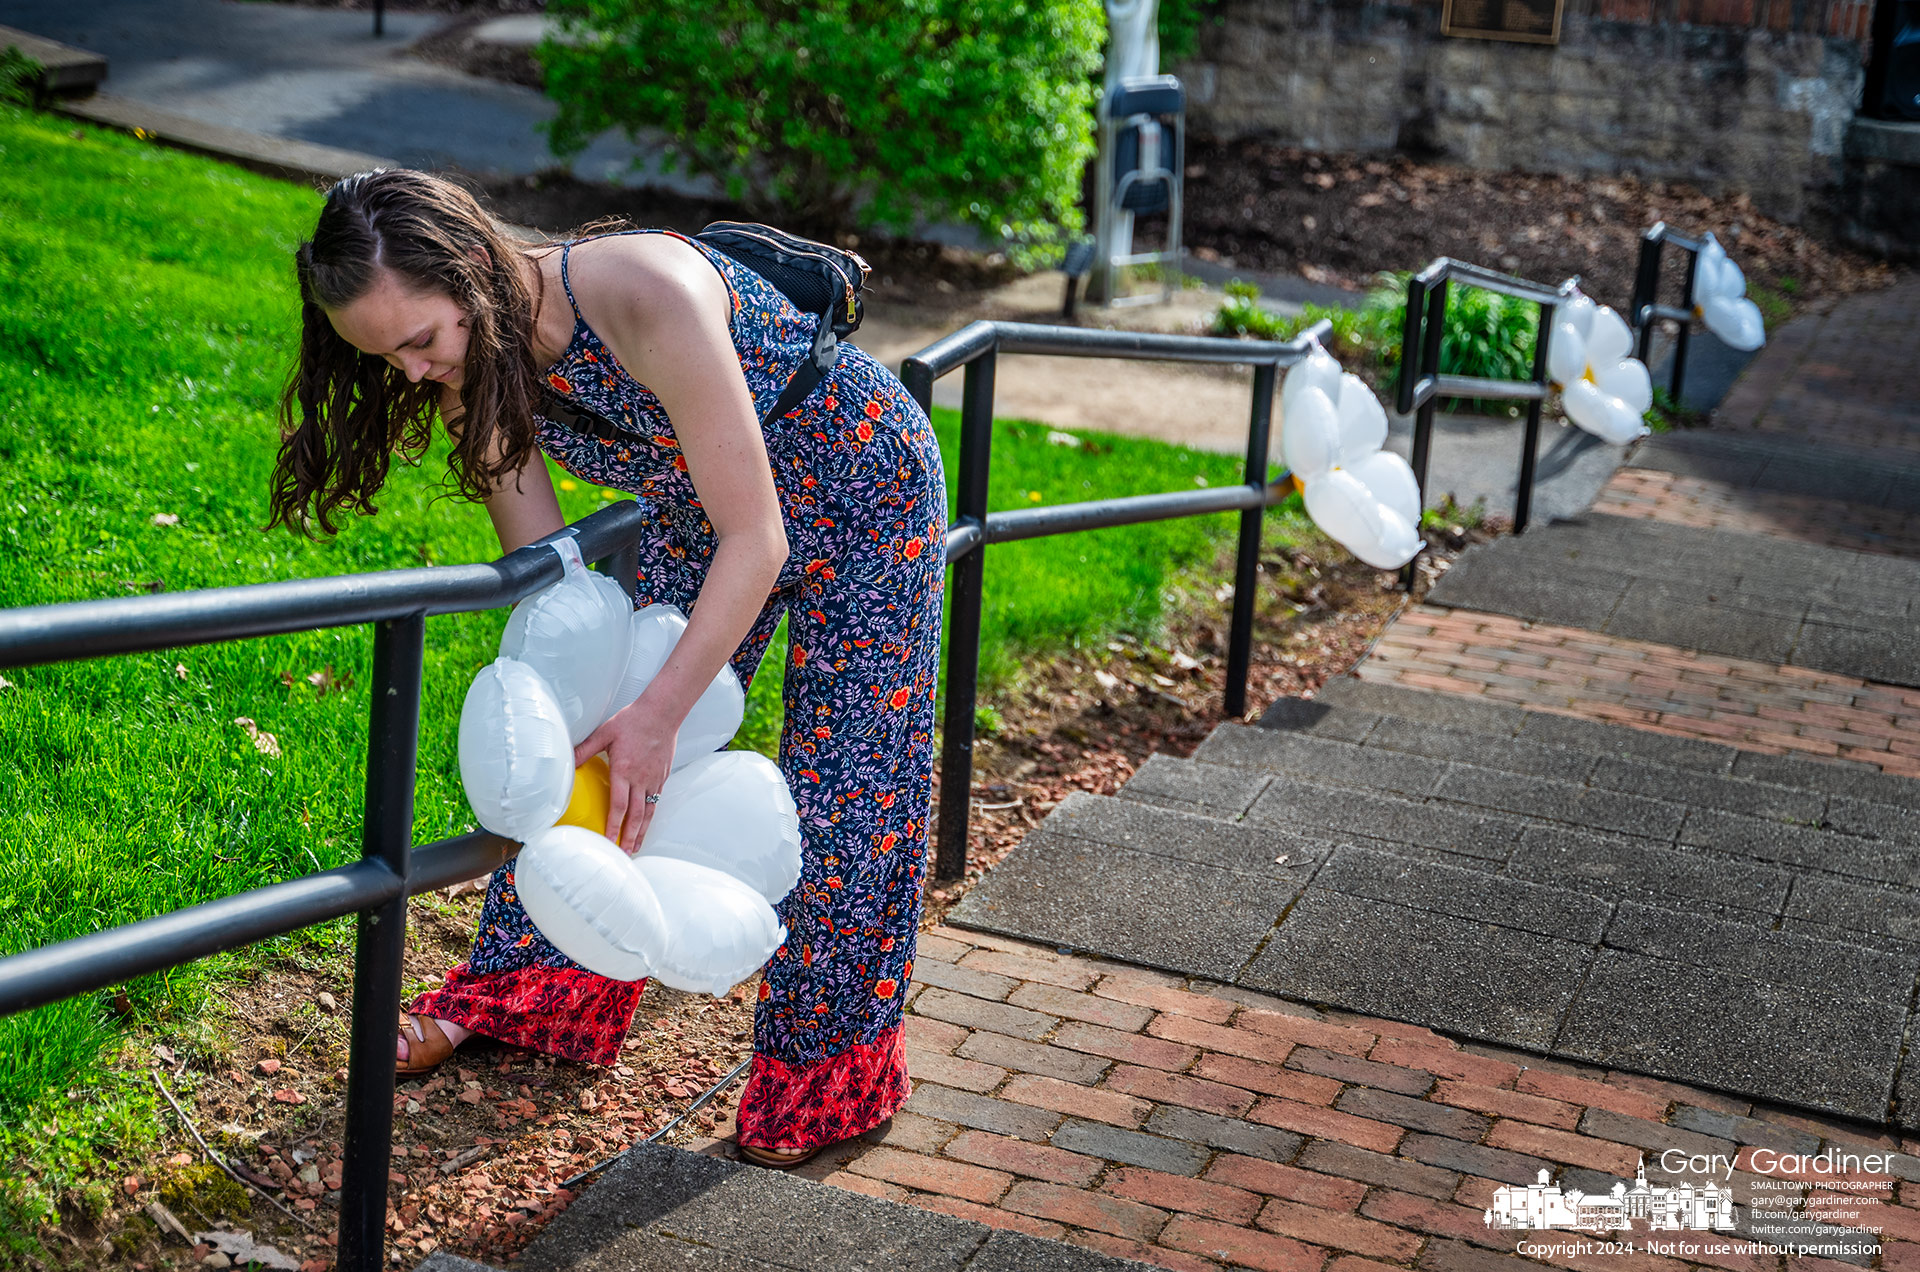 Otterbein student Lillian Moregret attaches inflated flowers to the handrails at the Alum Creek Park Amphitheater where the school's Celebration of Service and Leadership award presentations will take place later in the day. My Final Photo for April 18, 2024.